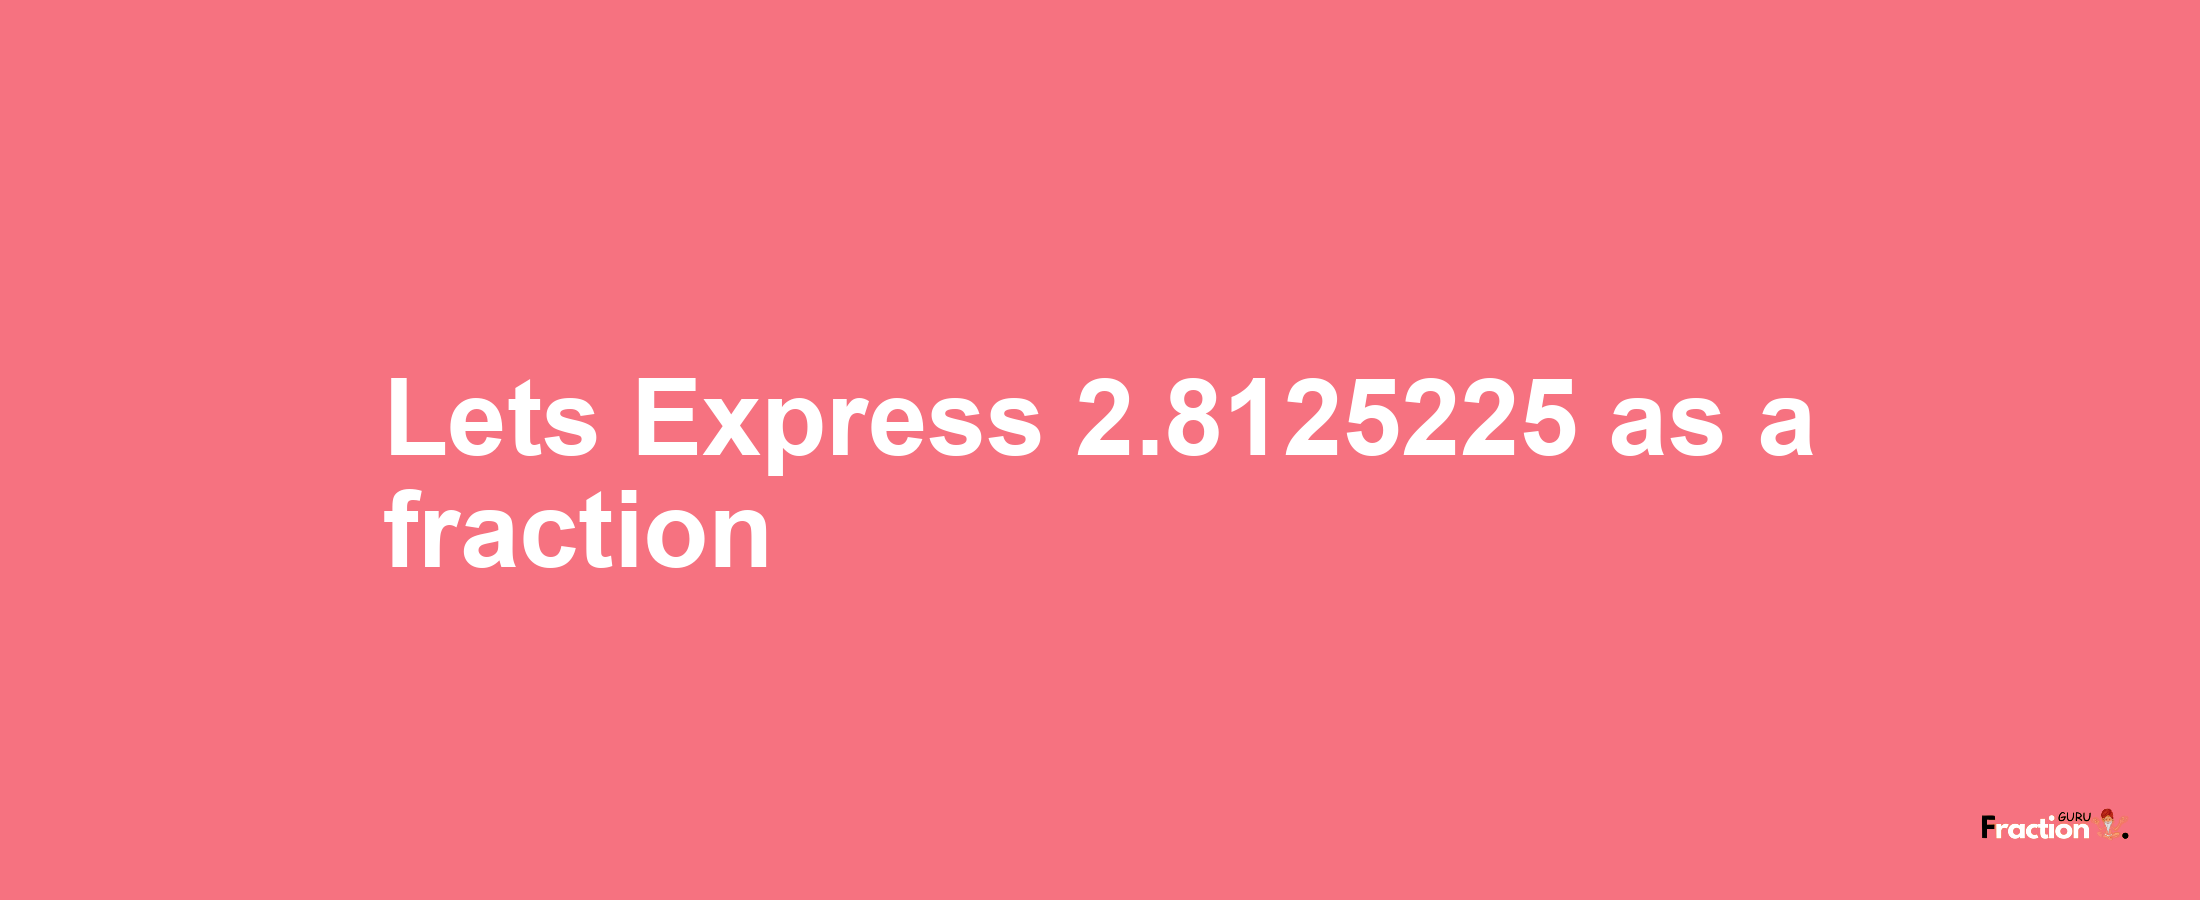 Lets Express 2.8125225 as afraction